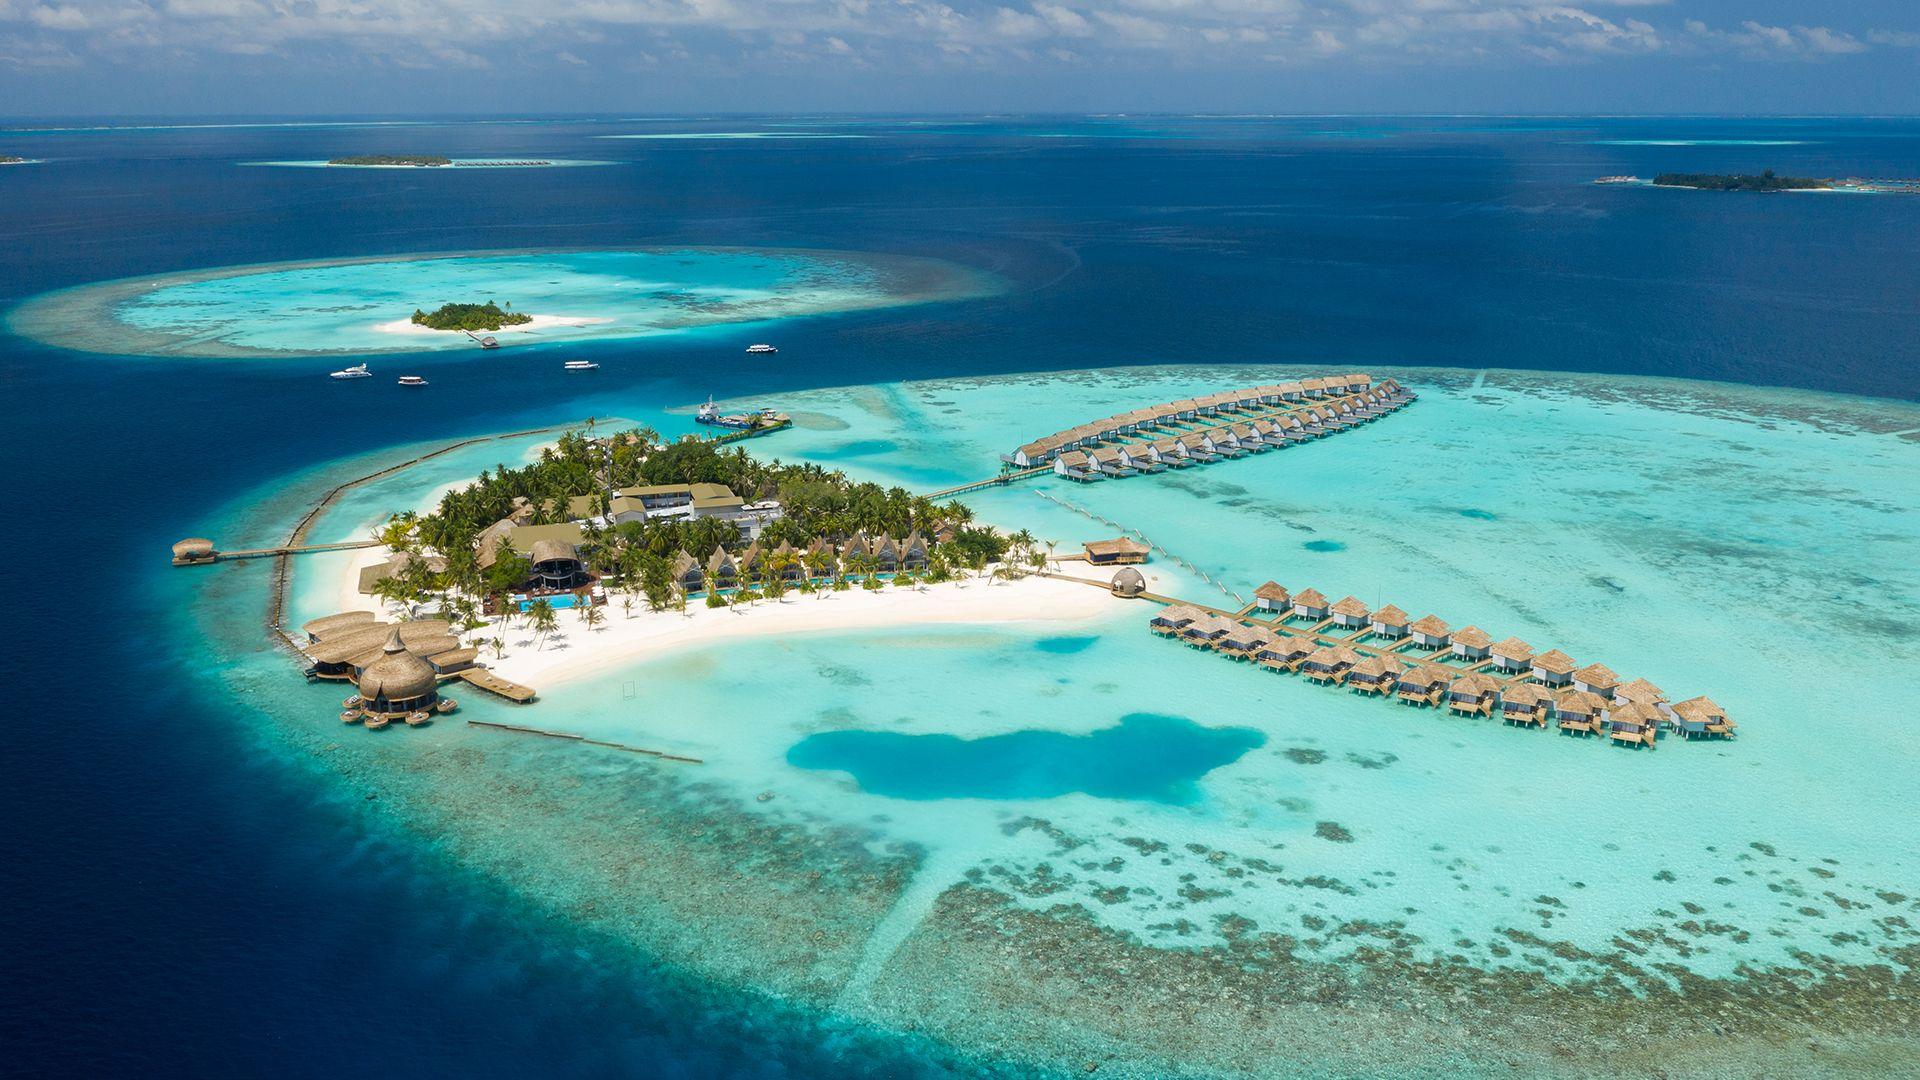 Discover a tropical paradise of pristine beaches, turquoise waters and luxurious resorts